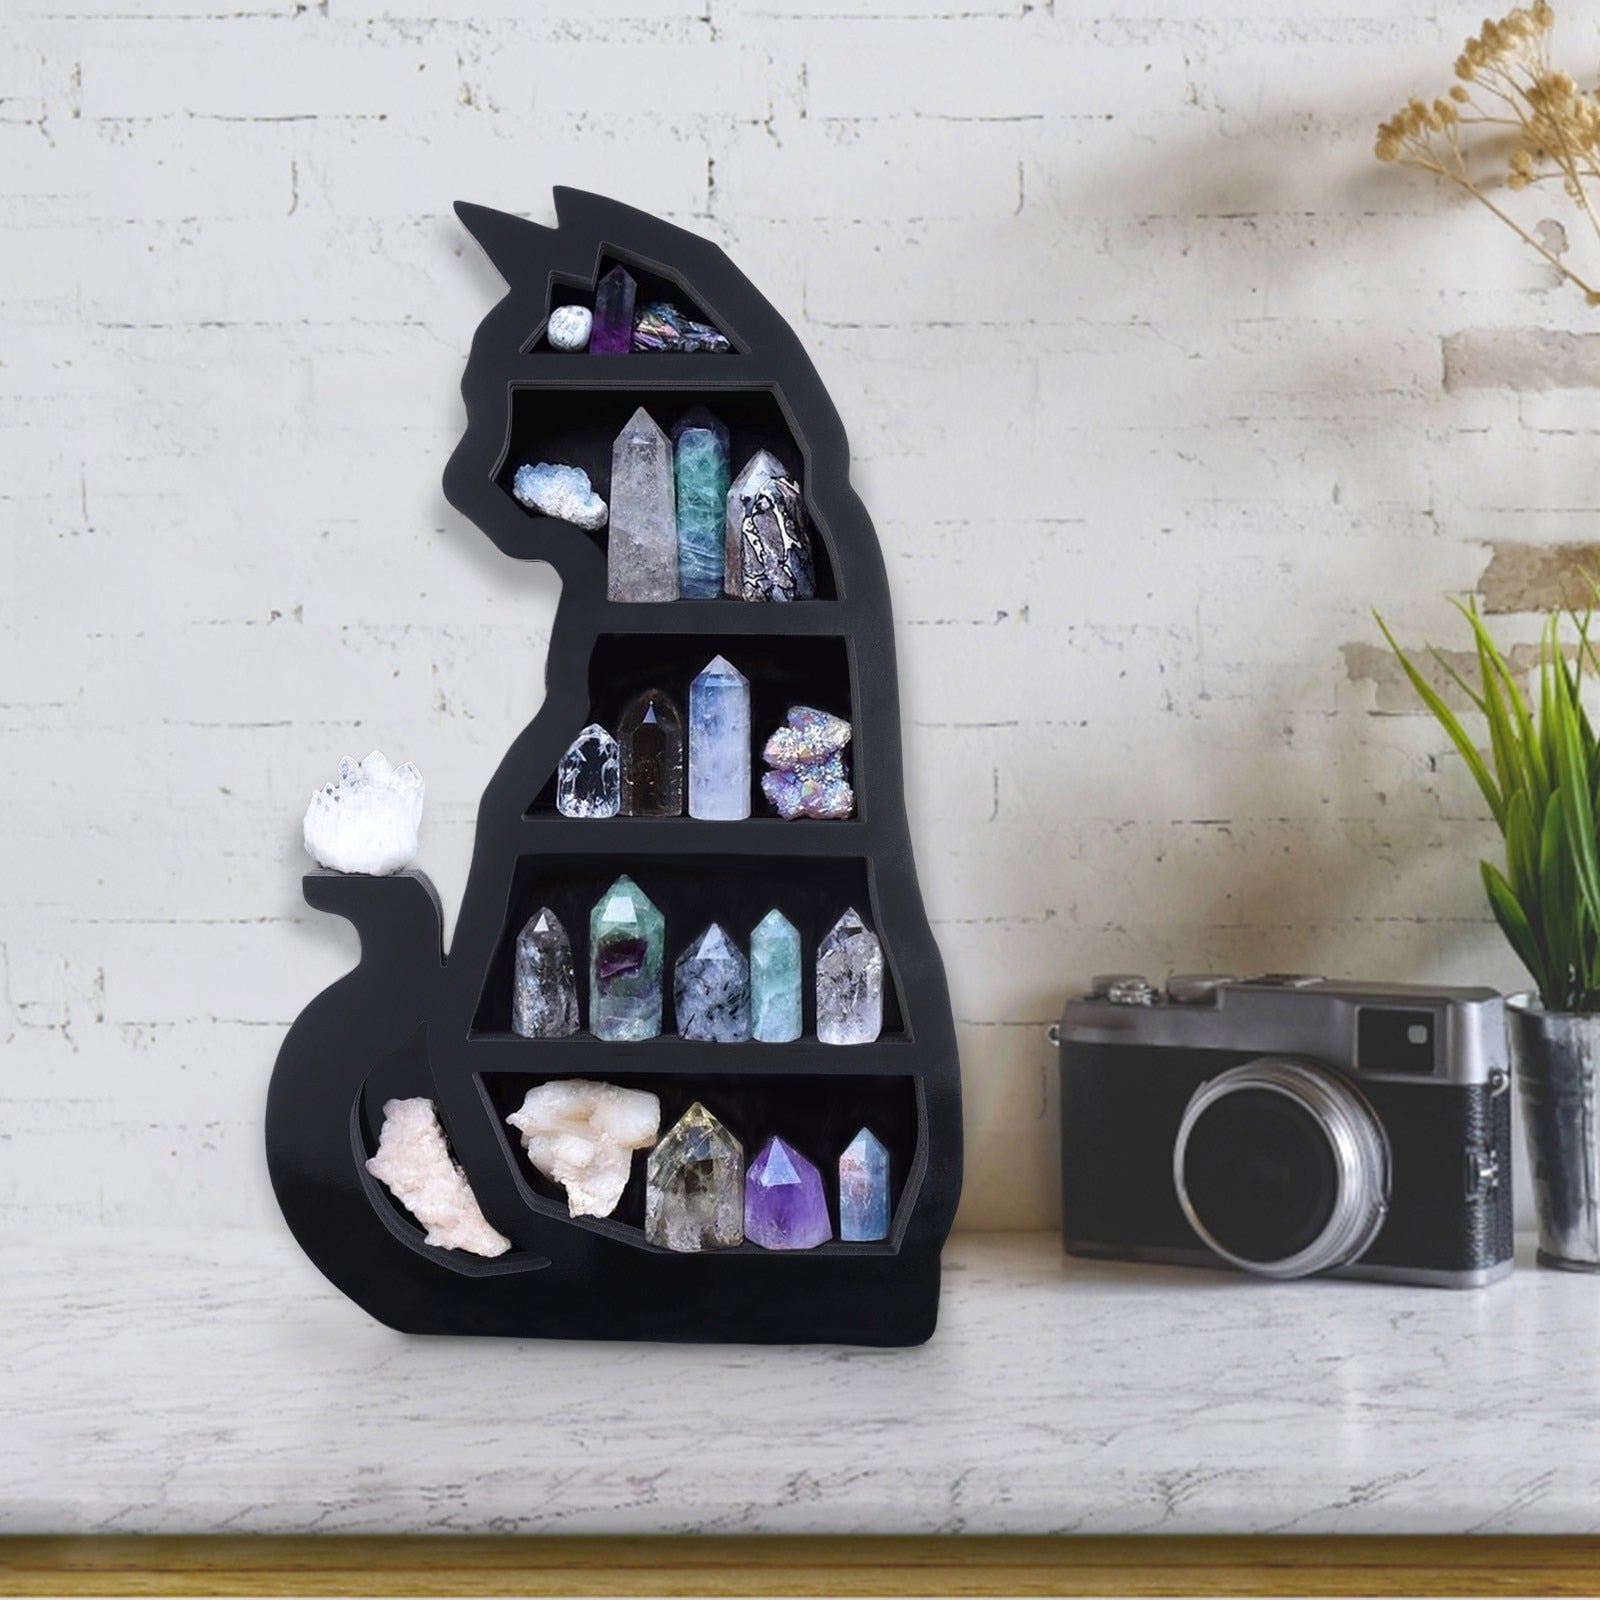 Cat and Moon Wooden Shelf for home decor4